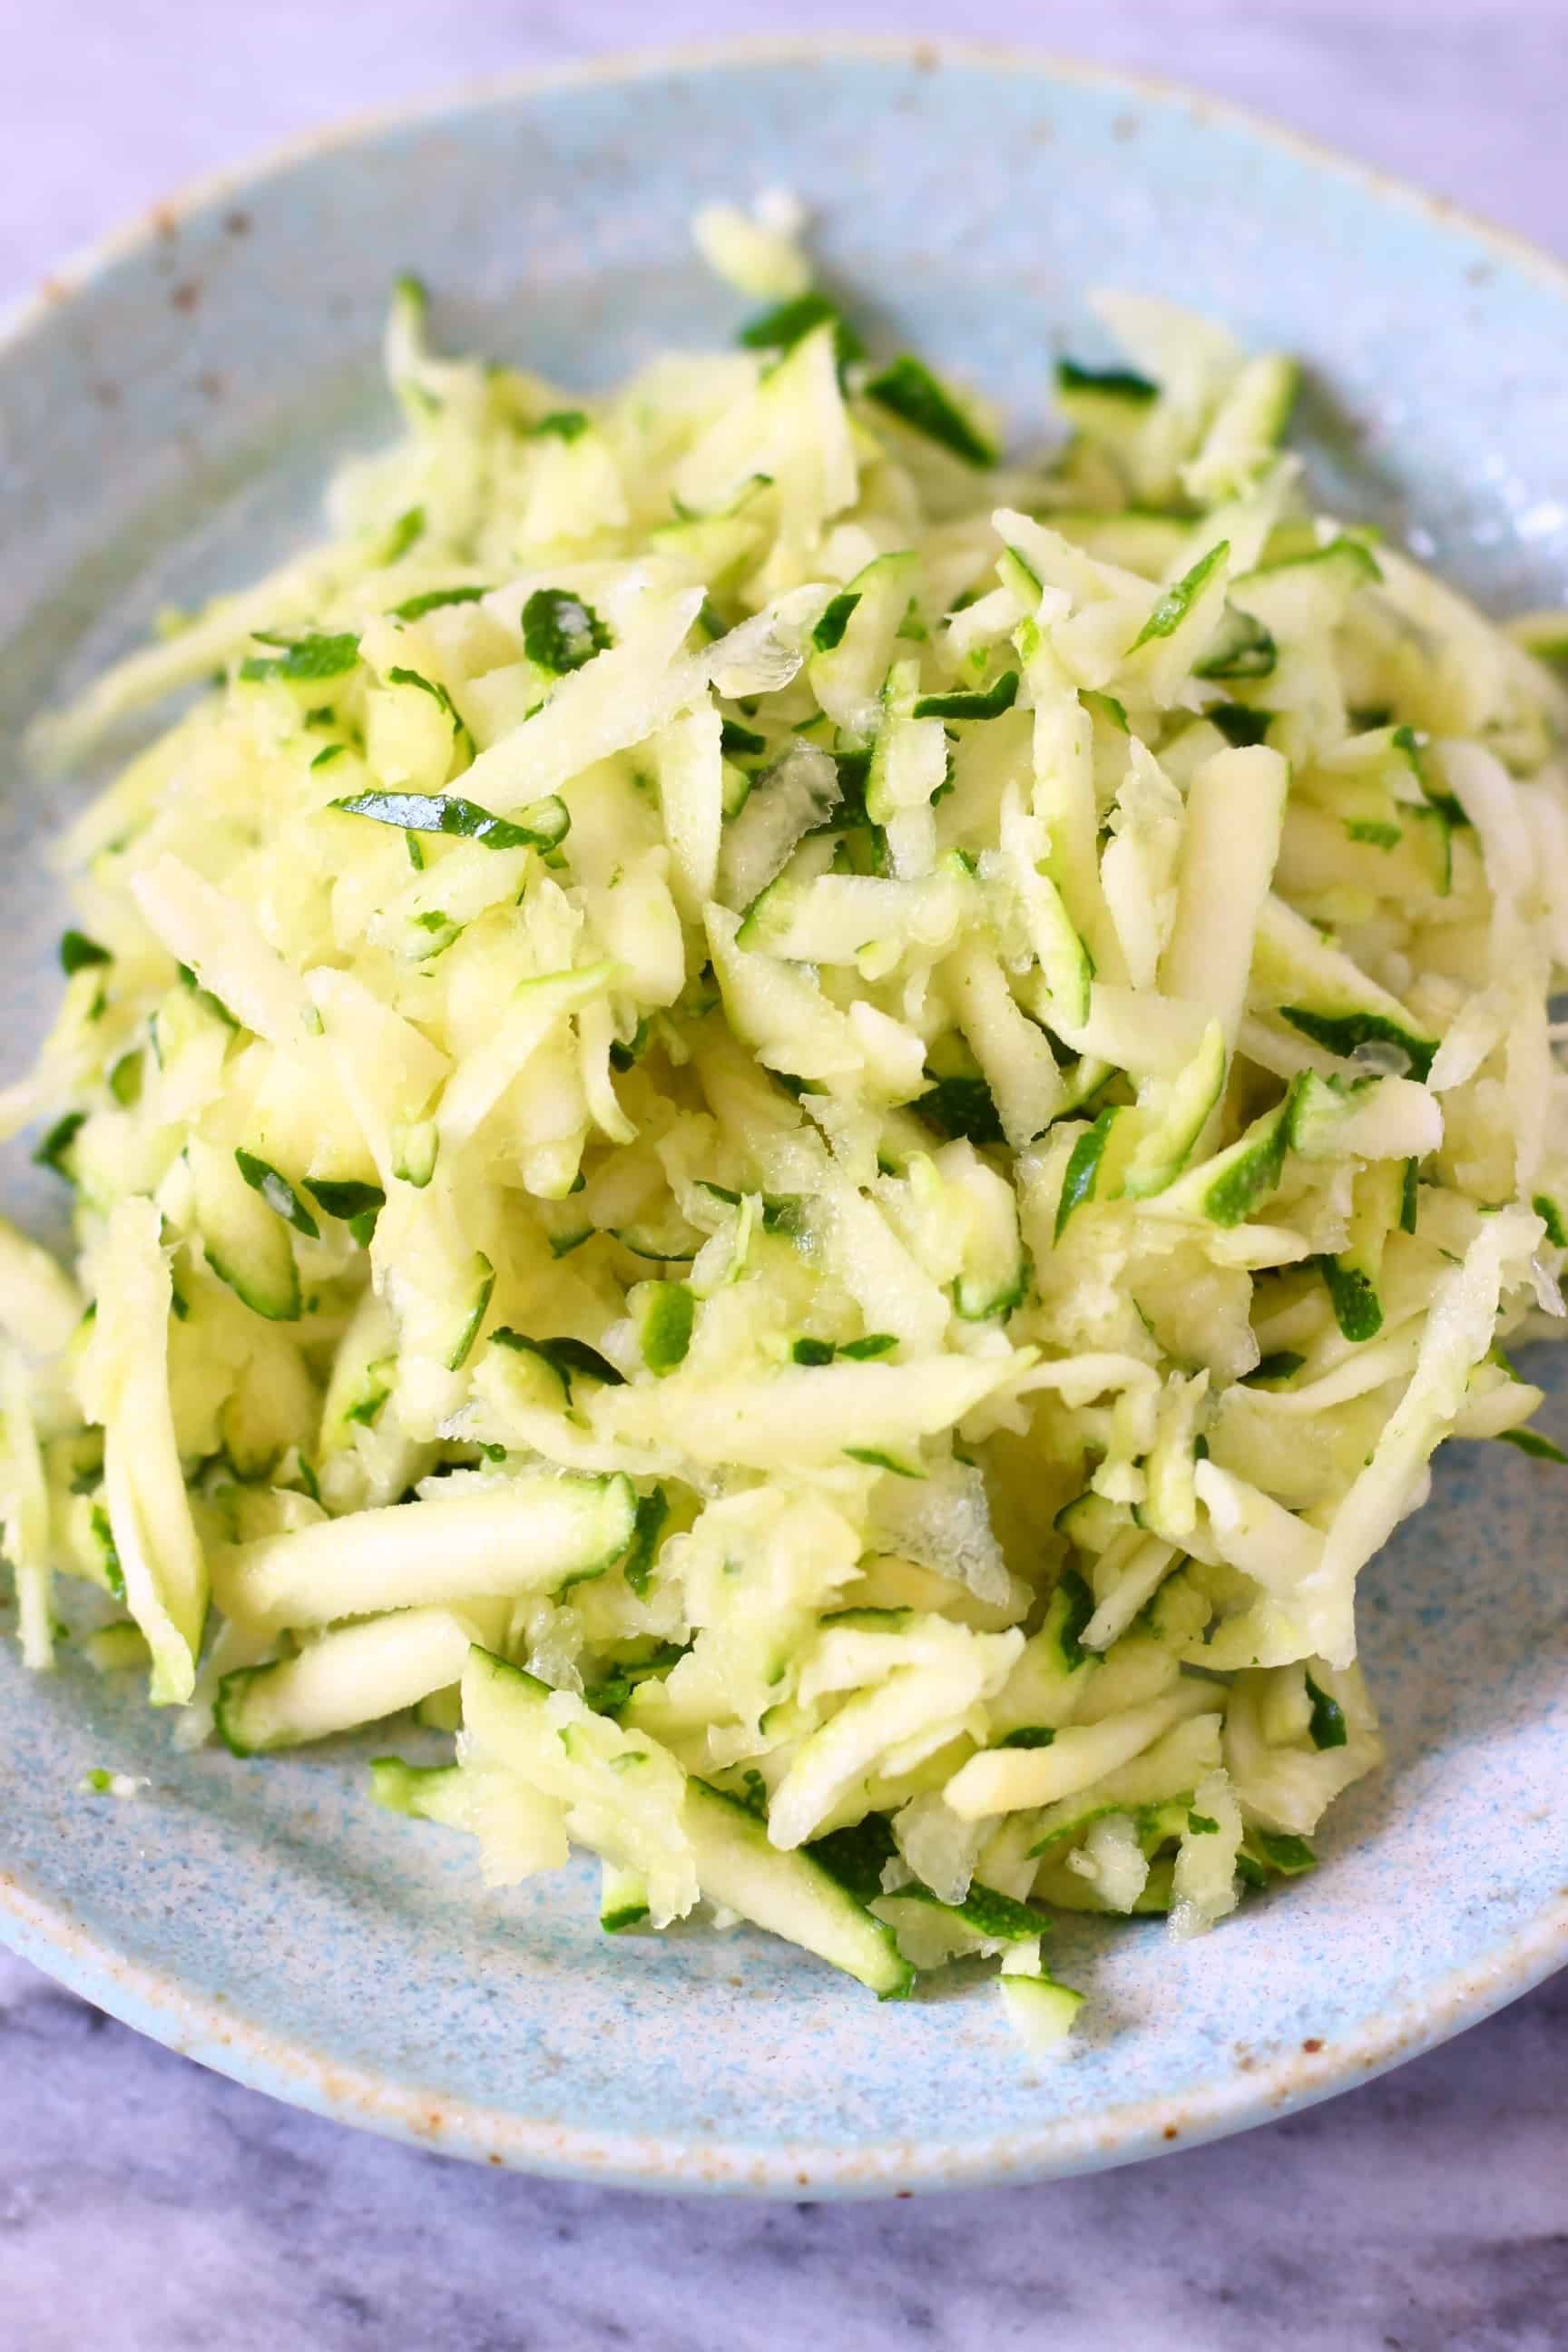 A pile of grated zucchini on a blue plate against a marble background